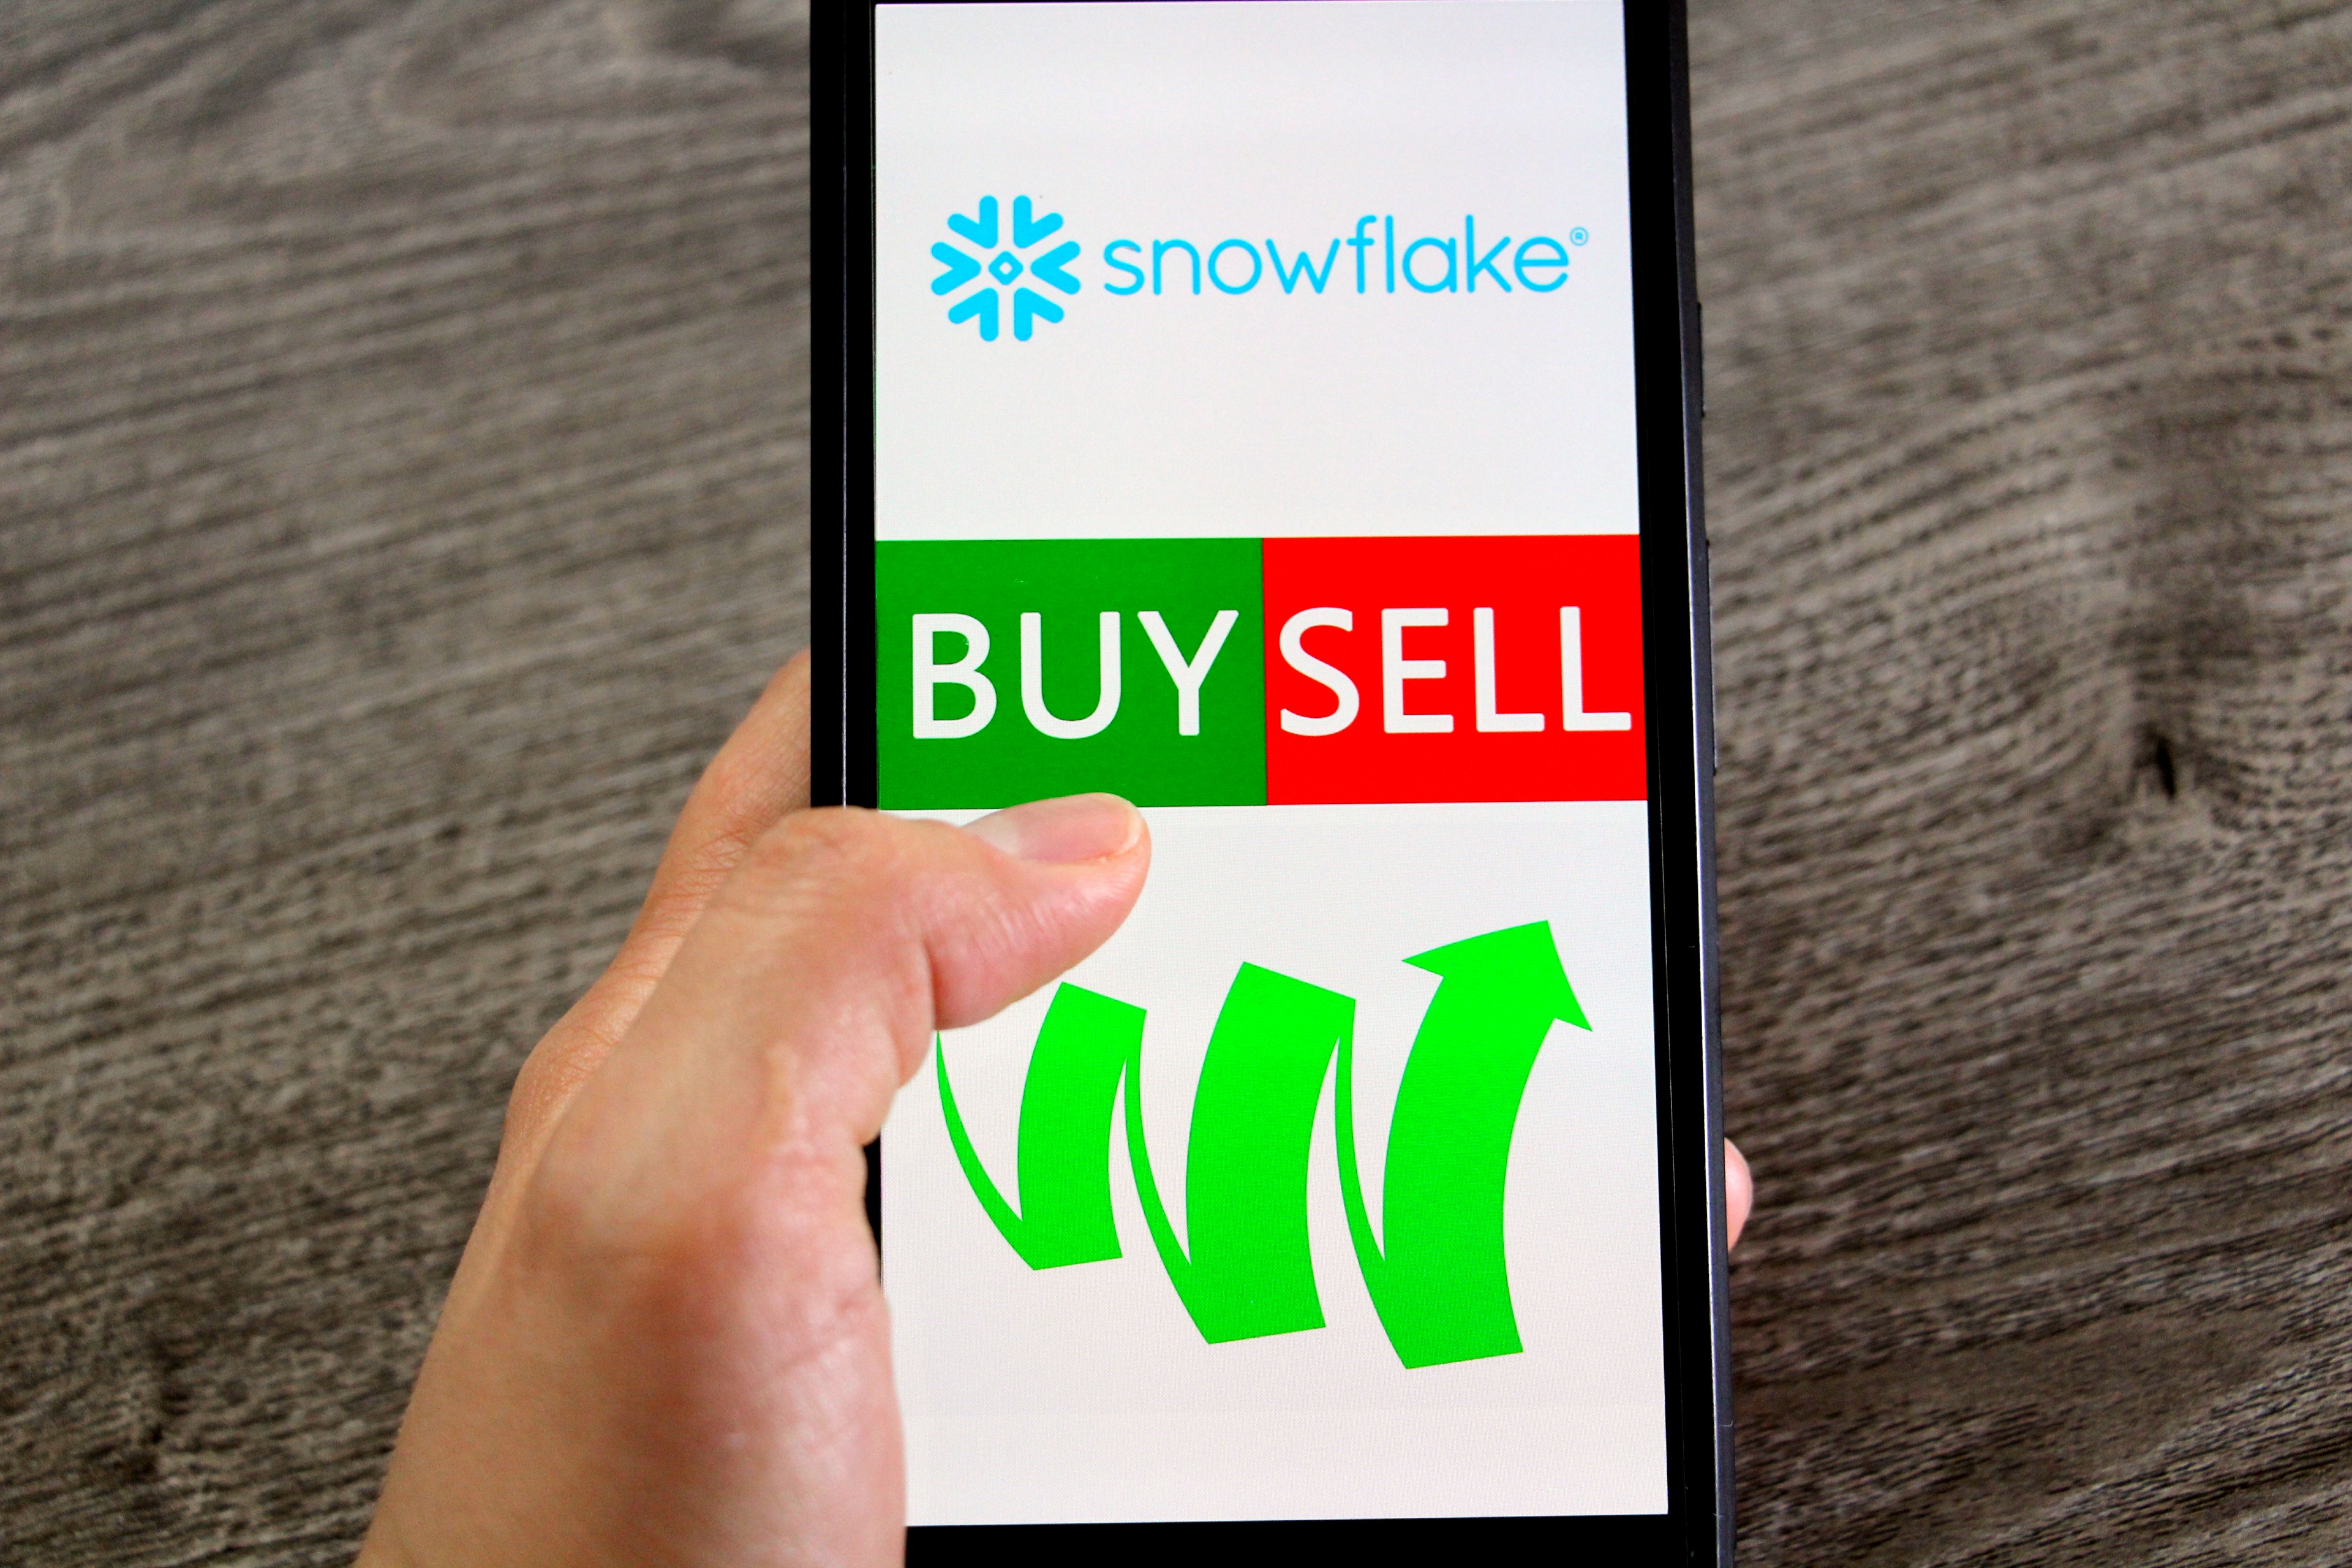 Gulfbrokers | Snowflake stock could pop above $200 soon